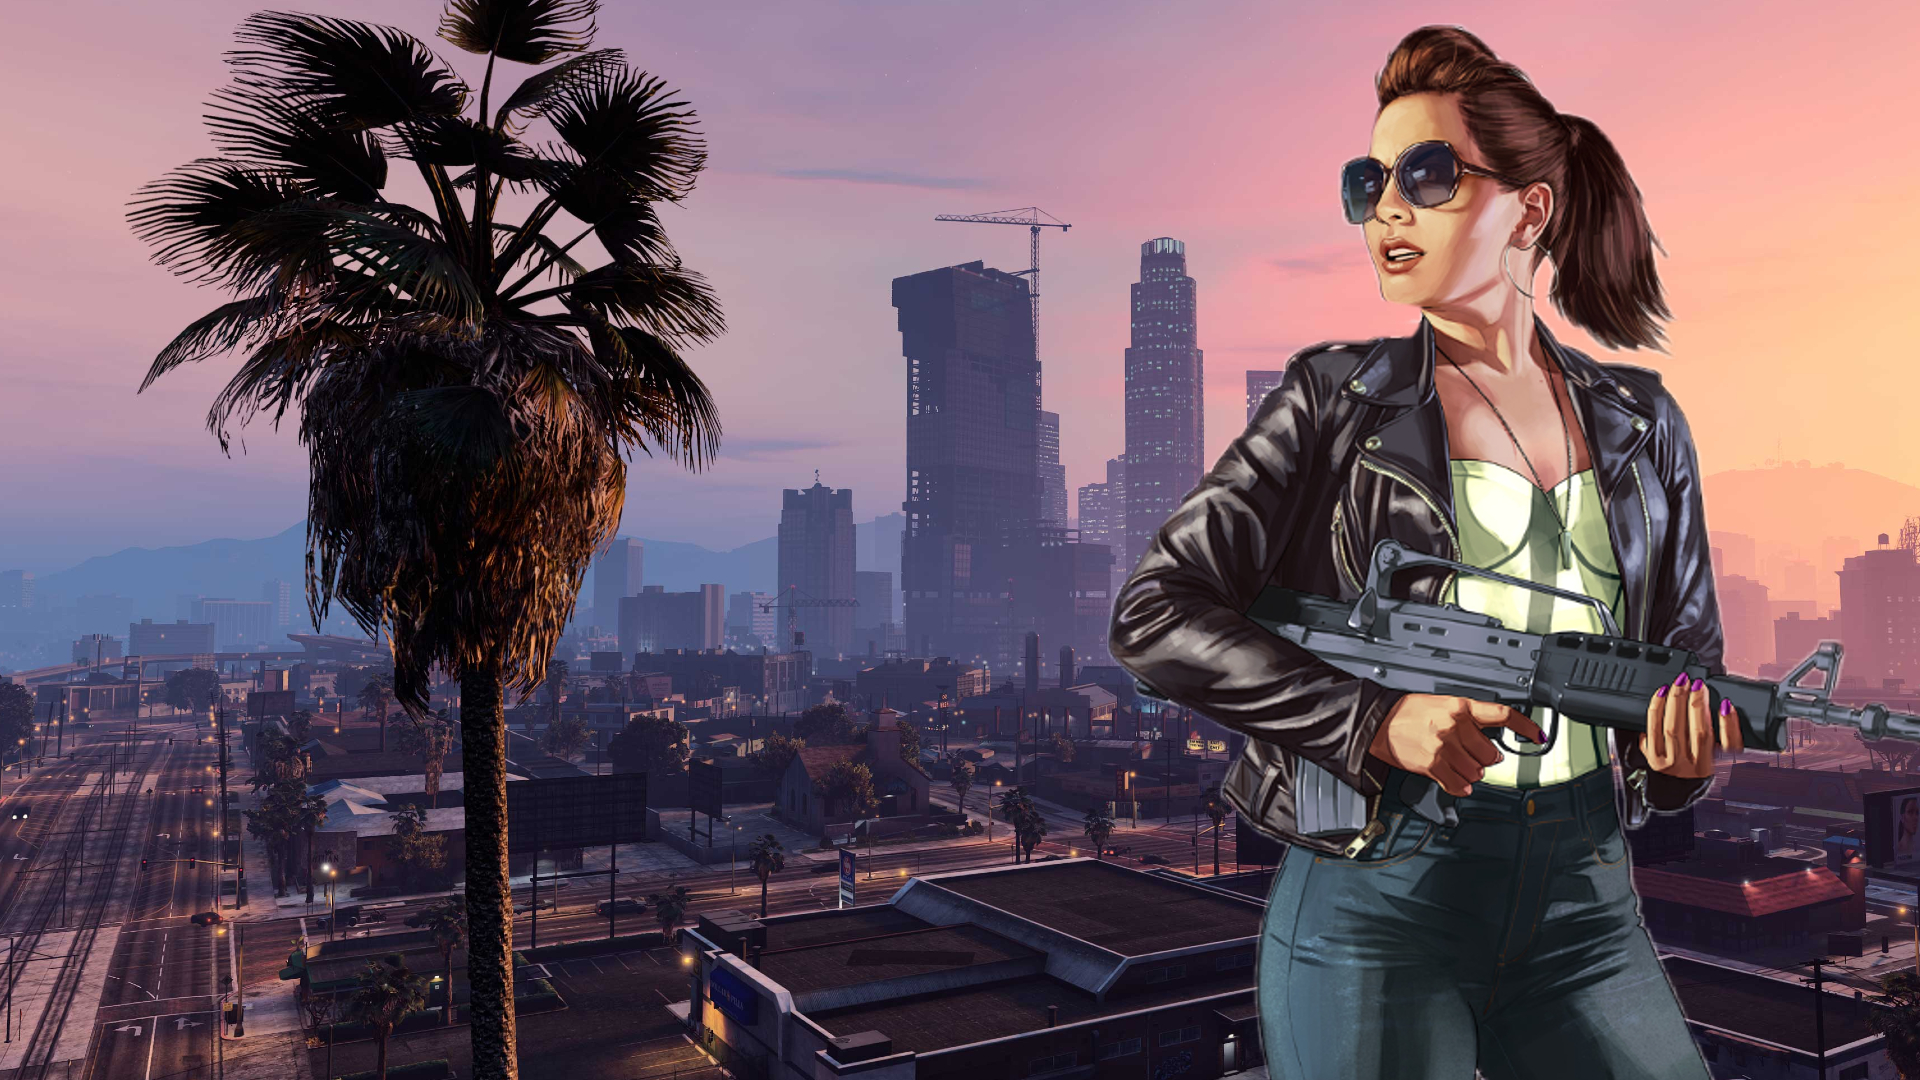 GTA 6 Leak Just Gave A Look At The Main Character